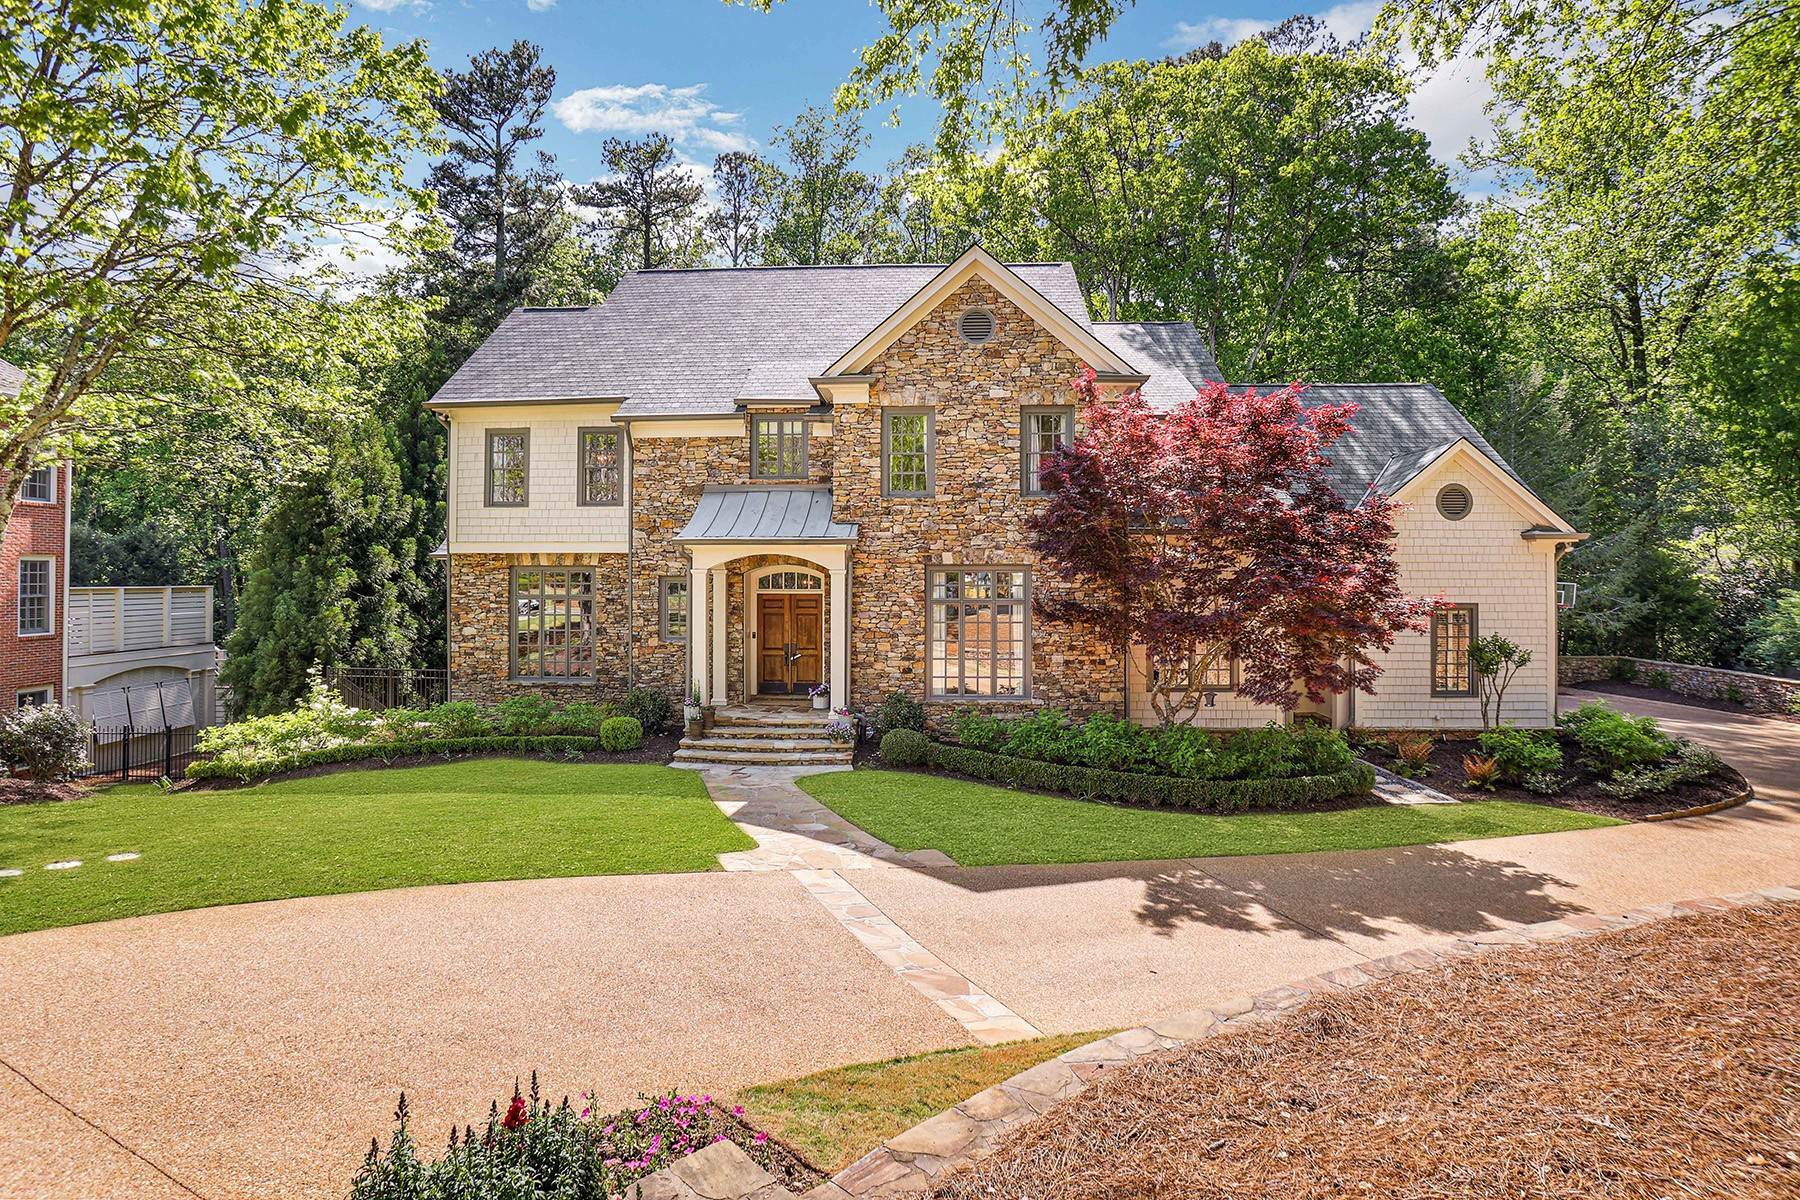 Single Family Homes for Sale at Beautifully Renovated Home on Exclusive Private Cul-de-sac in Chastain Park 484 Conway Manor Drive Atlanta, Georgia 30327 United States